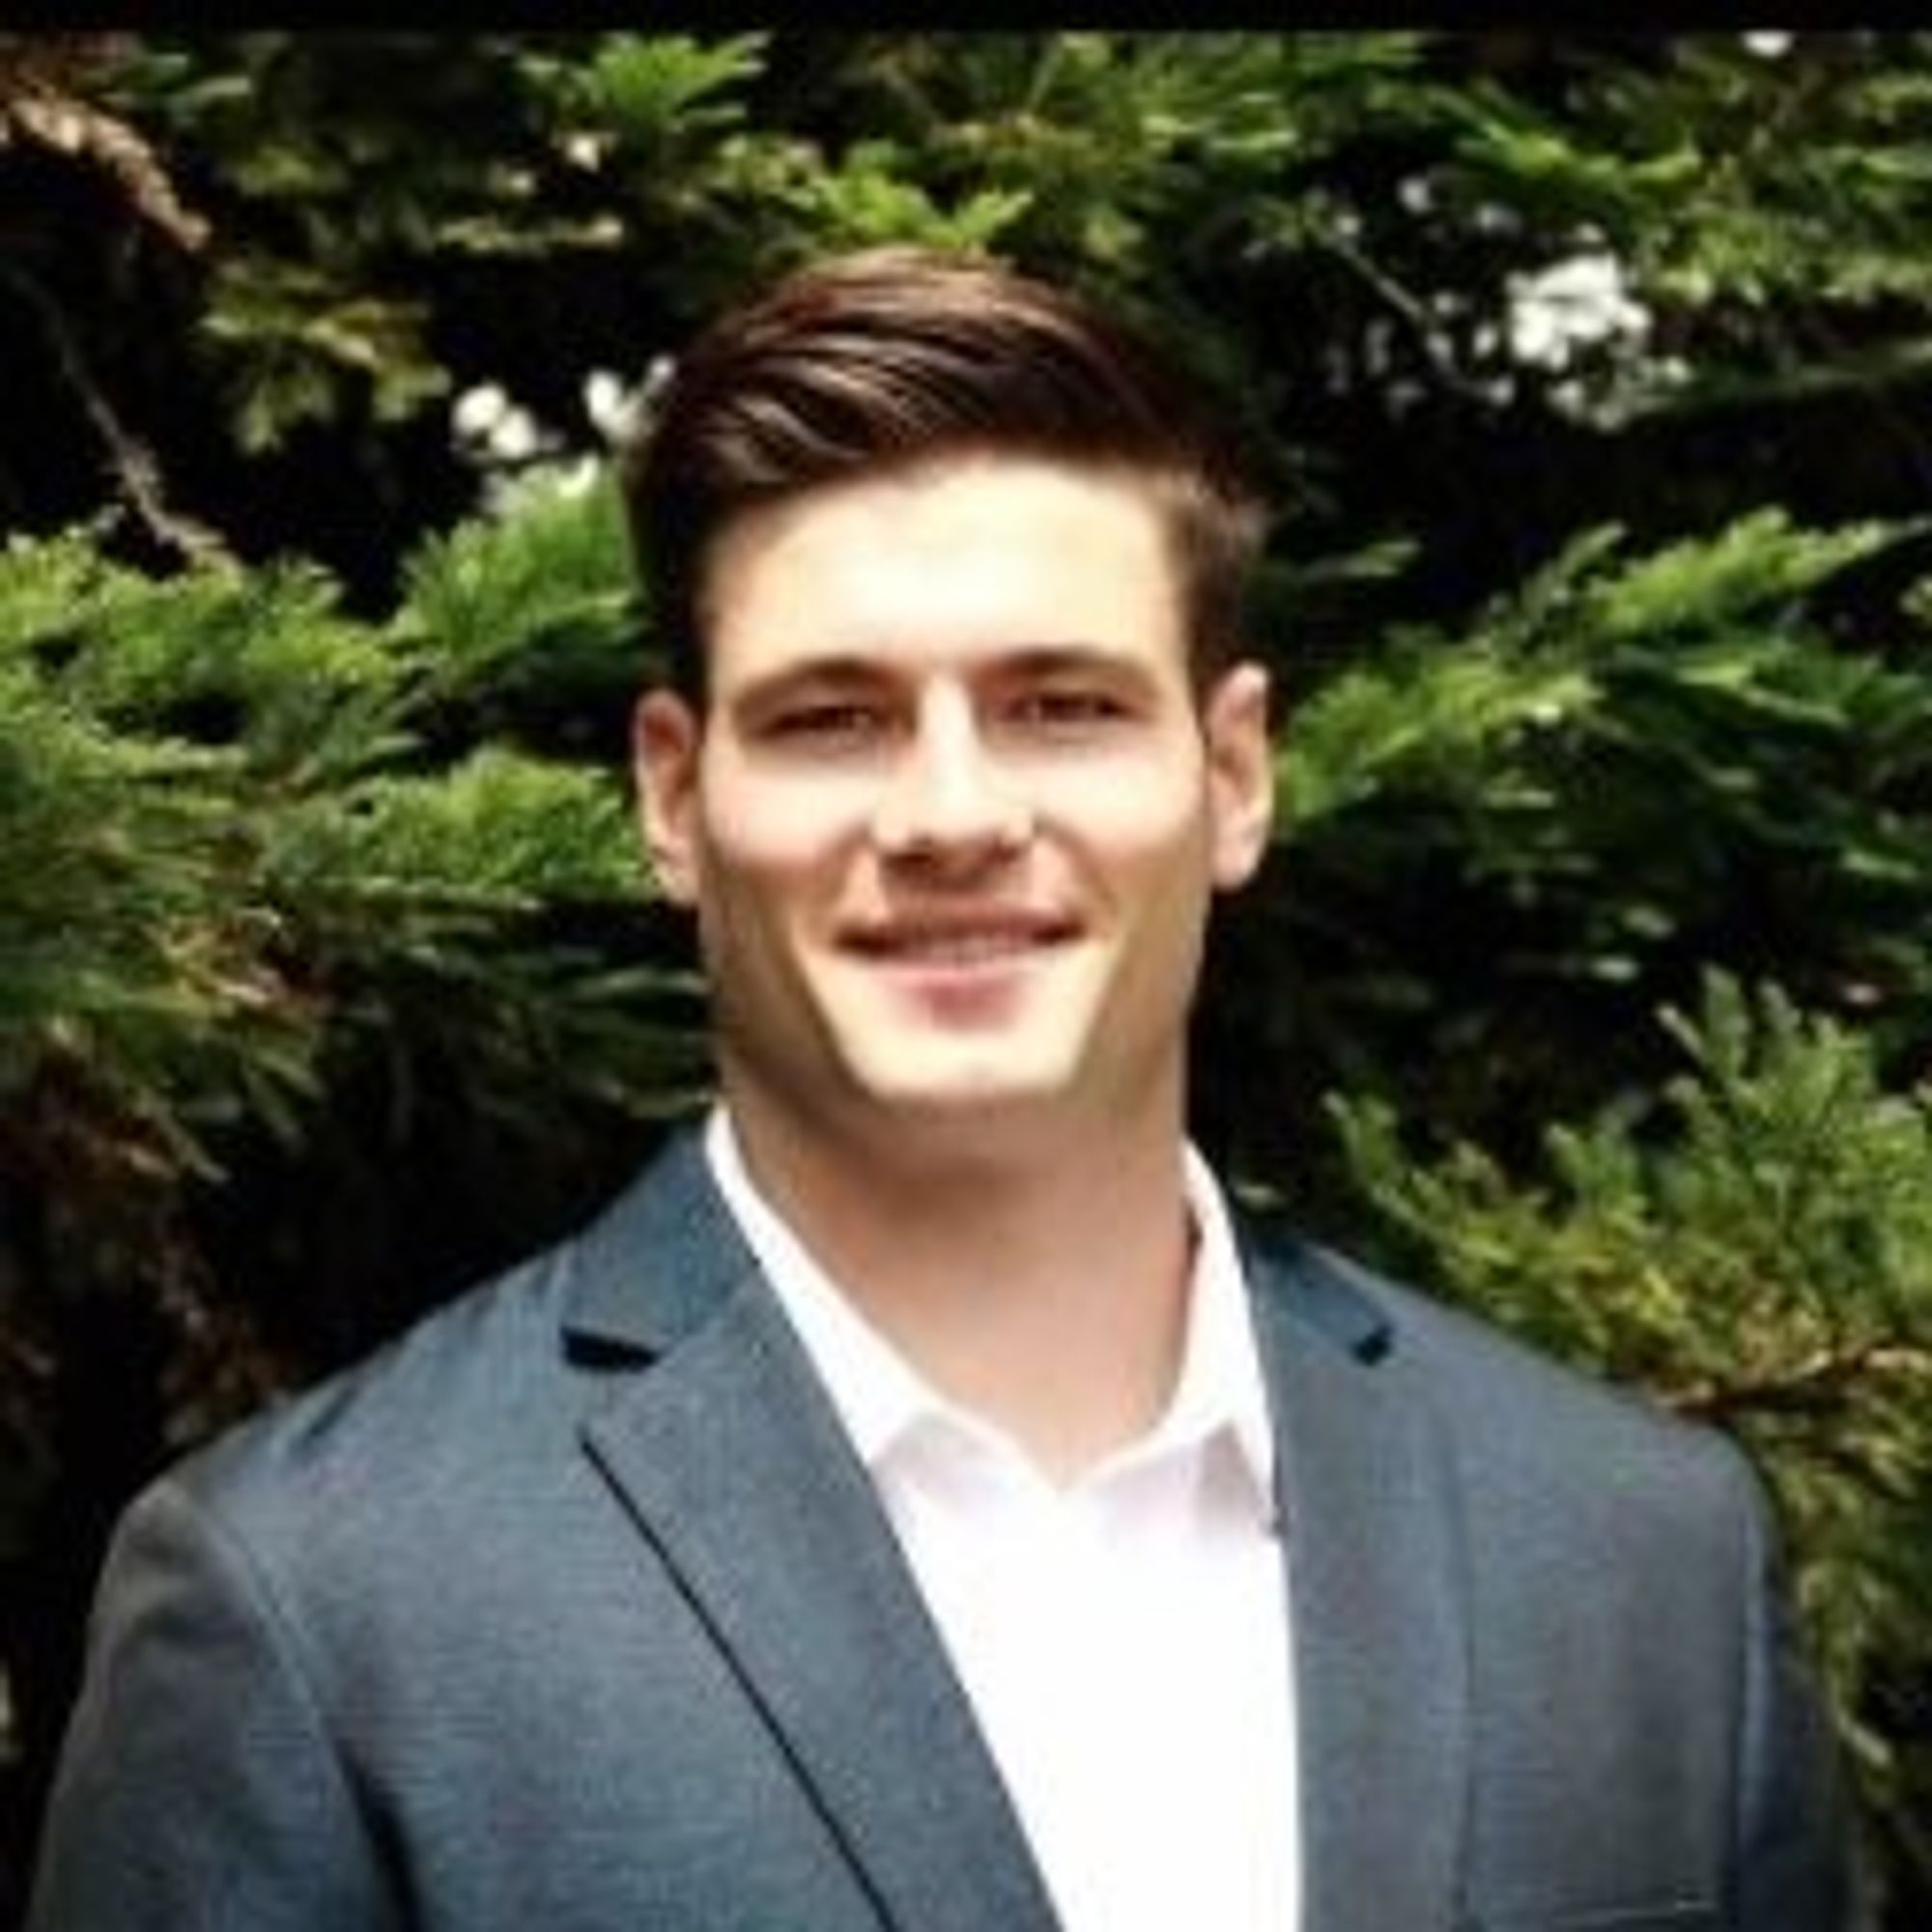 Beau Hershberger
Account Executive
Ex Oracle, Google, Salesforce • Rugby fan, amateur pickleballer, big skier, share same name as Alicia's cat